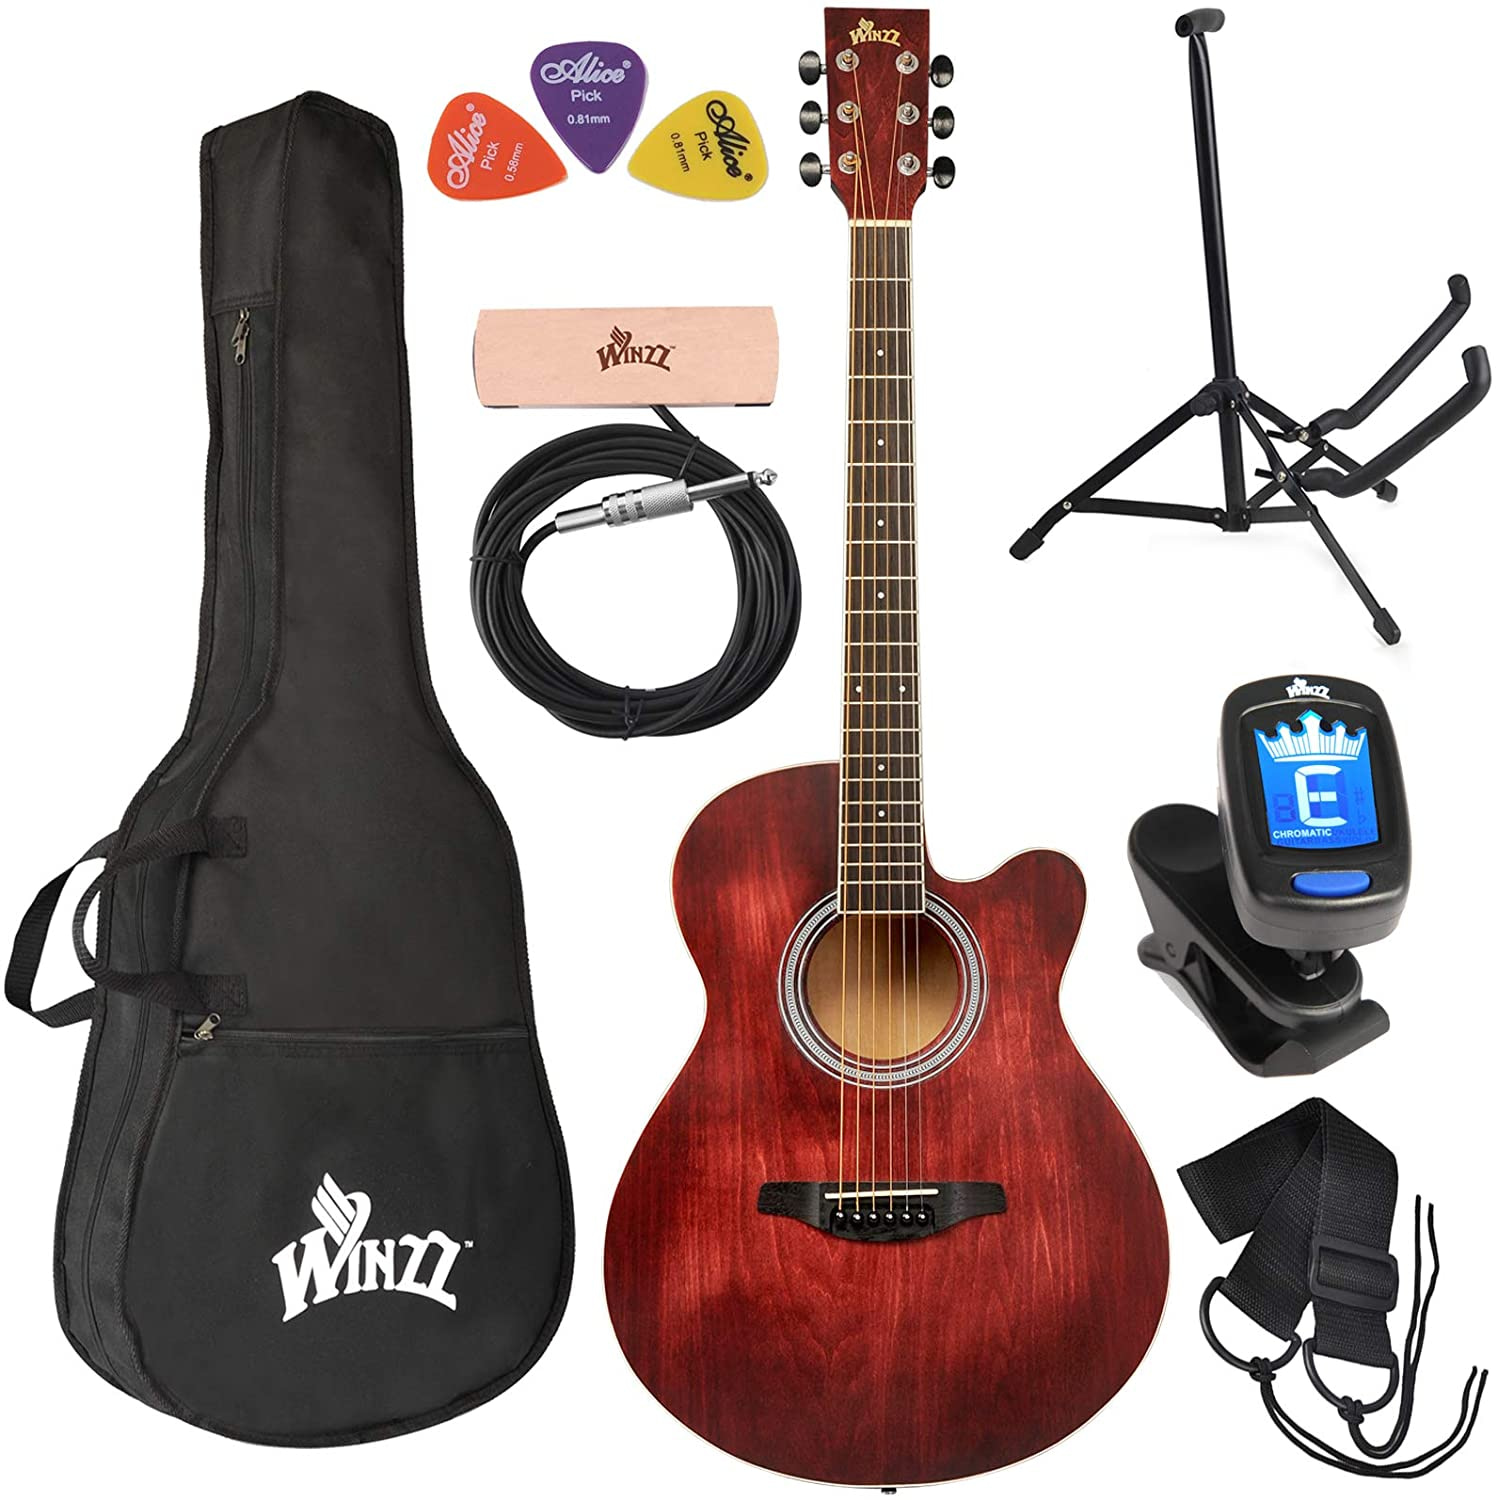 WINZZ 3/4 Dreadnought Acoustic Guitar Bundle with Online Lessons, Bag, Metronome Tuner, Wall-mounted Hanger, Strap, Picks & Cleaning Cloth,36 Inches Right Handed, Dark Hunter Green 26